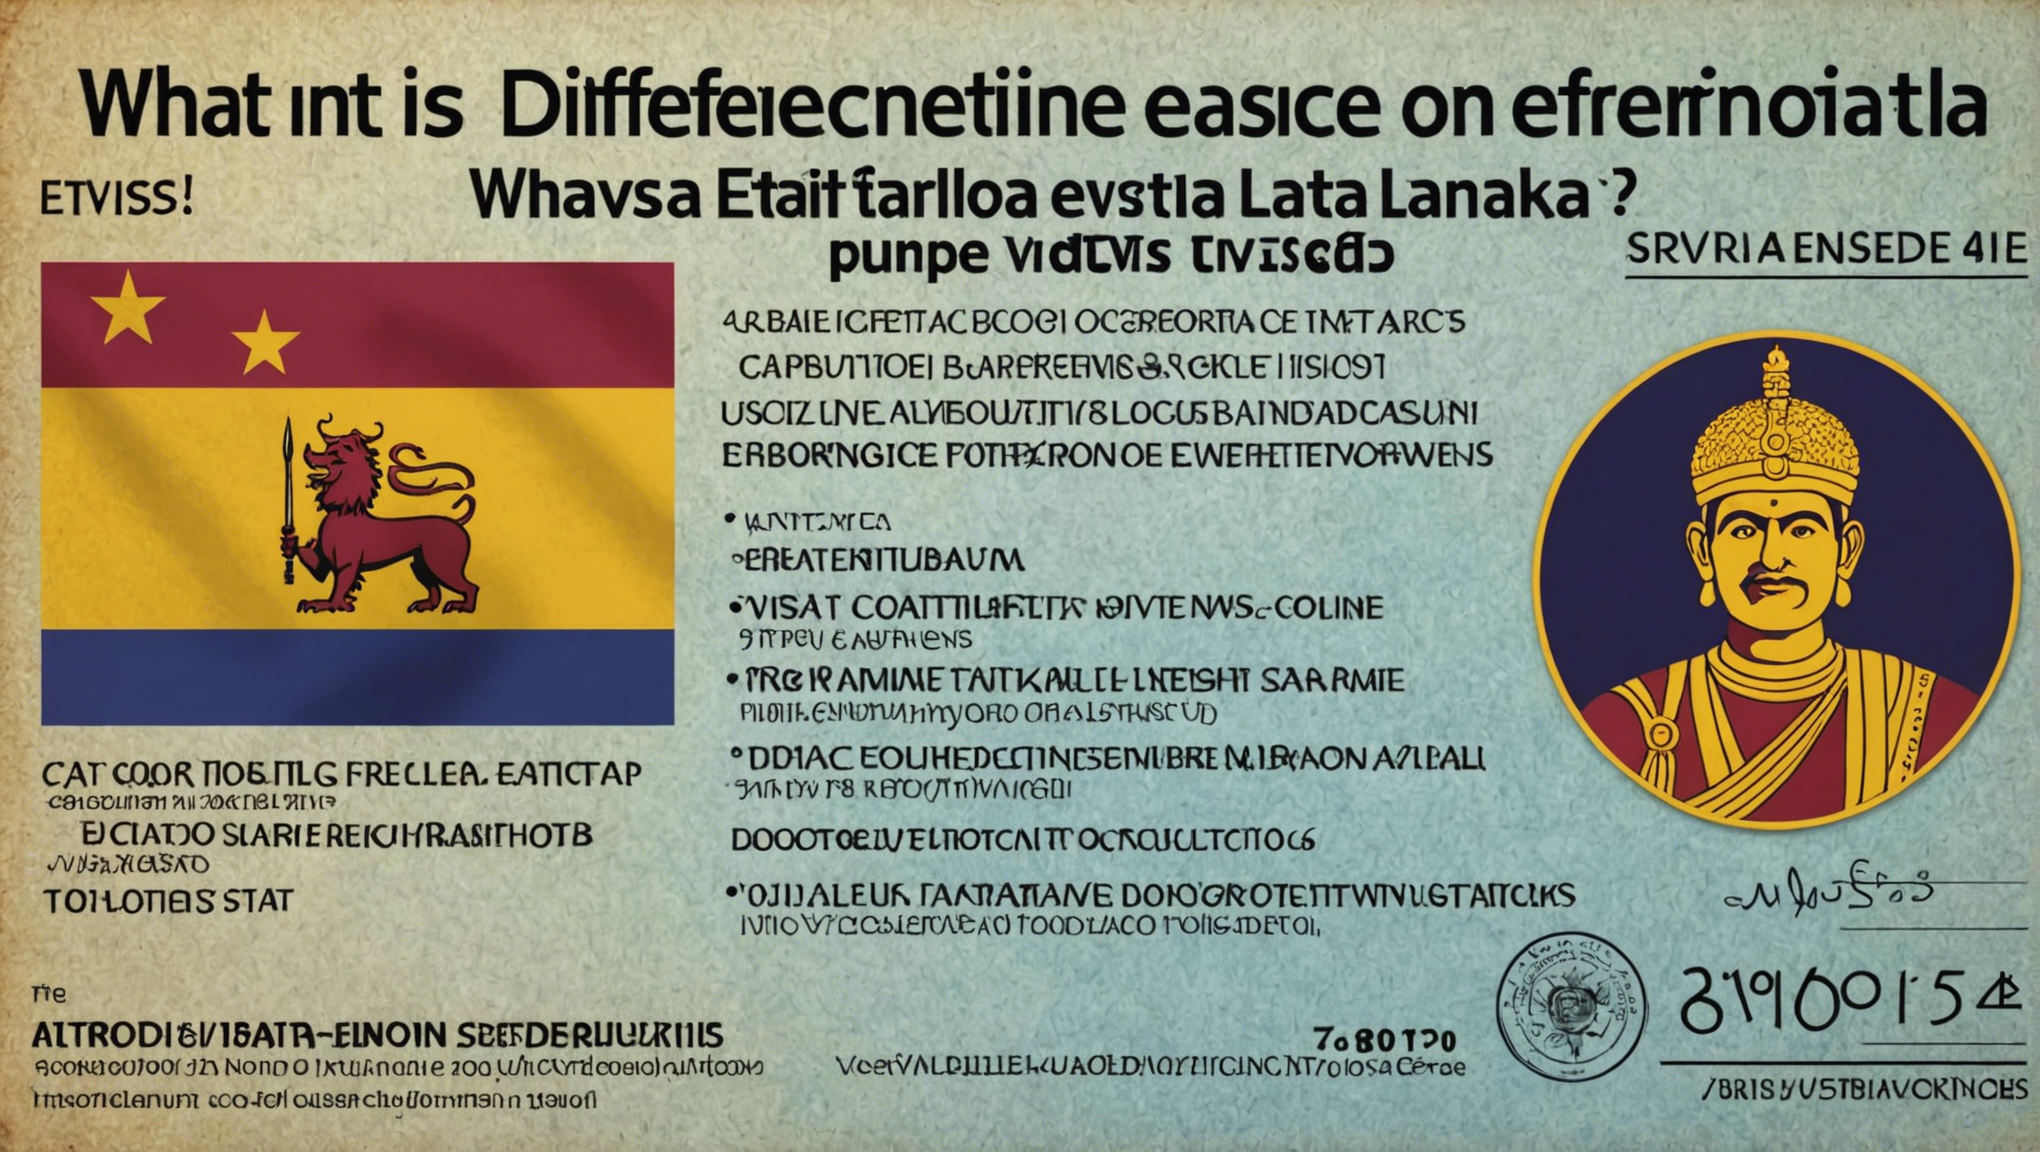 find out the difference between the eta and the electronic visa for sri lanka and choose the best option for your trip.